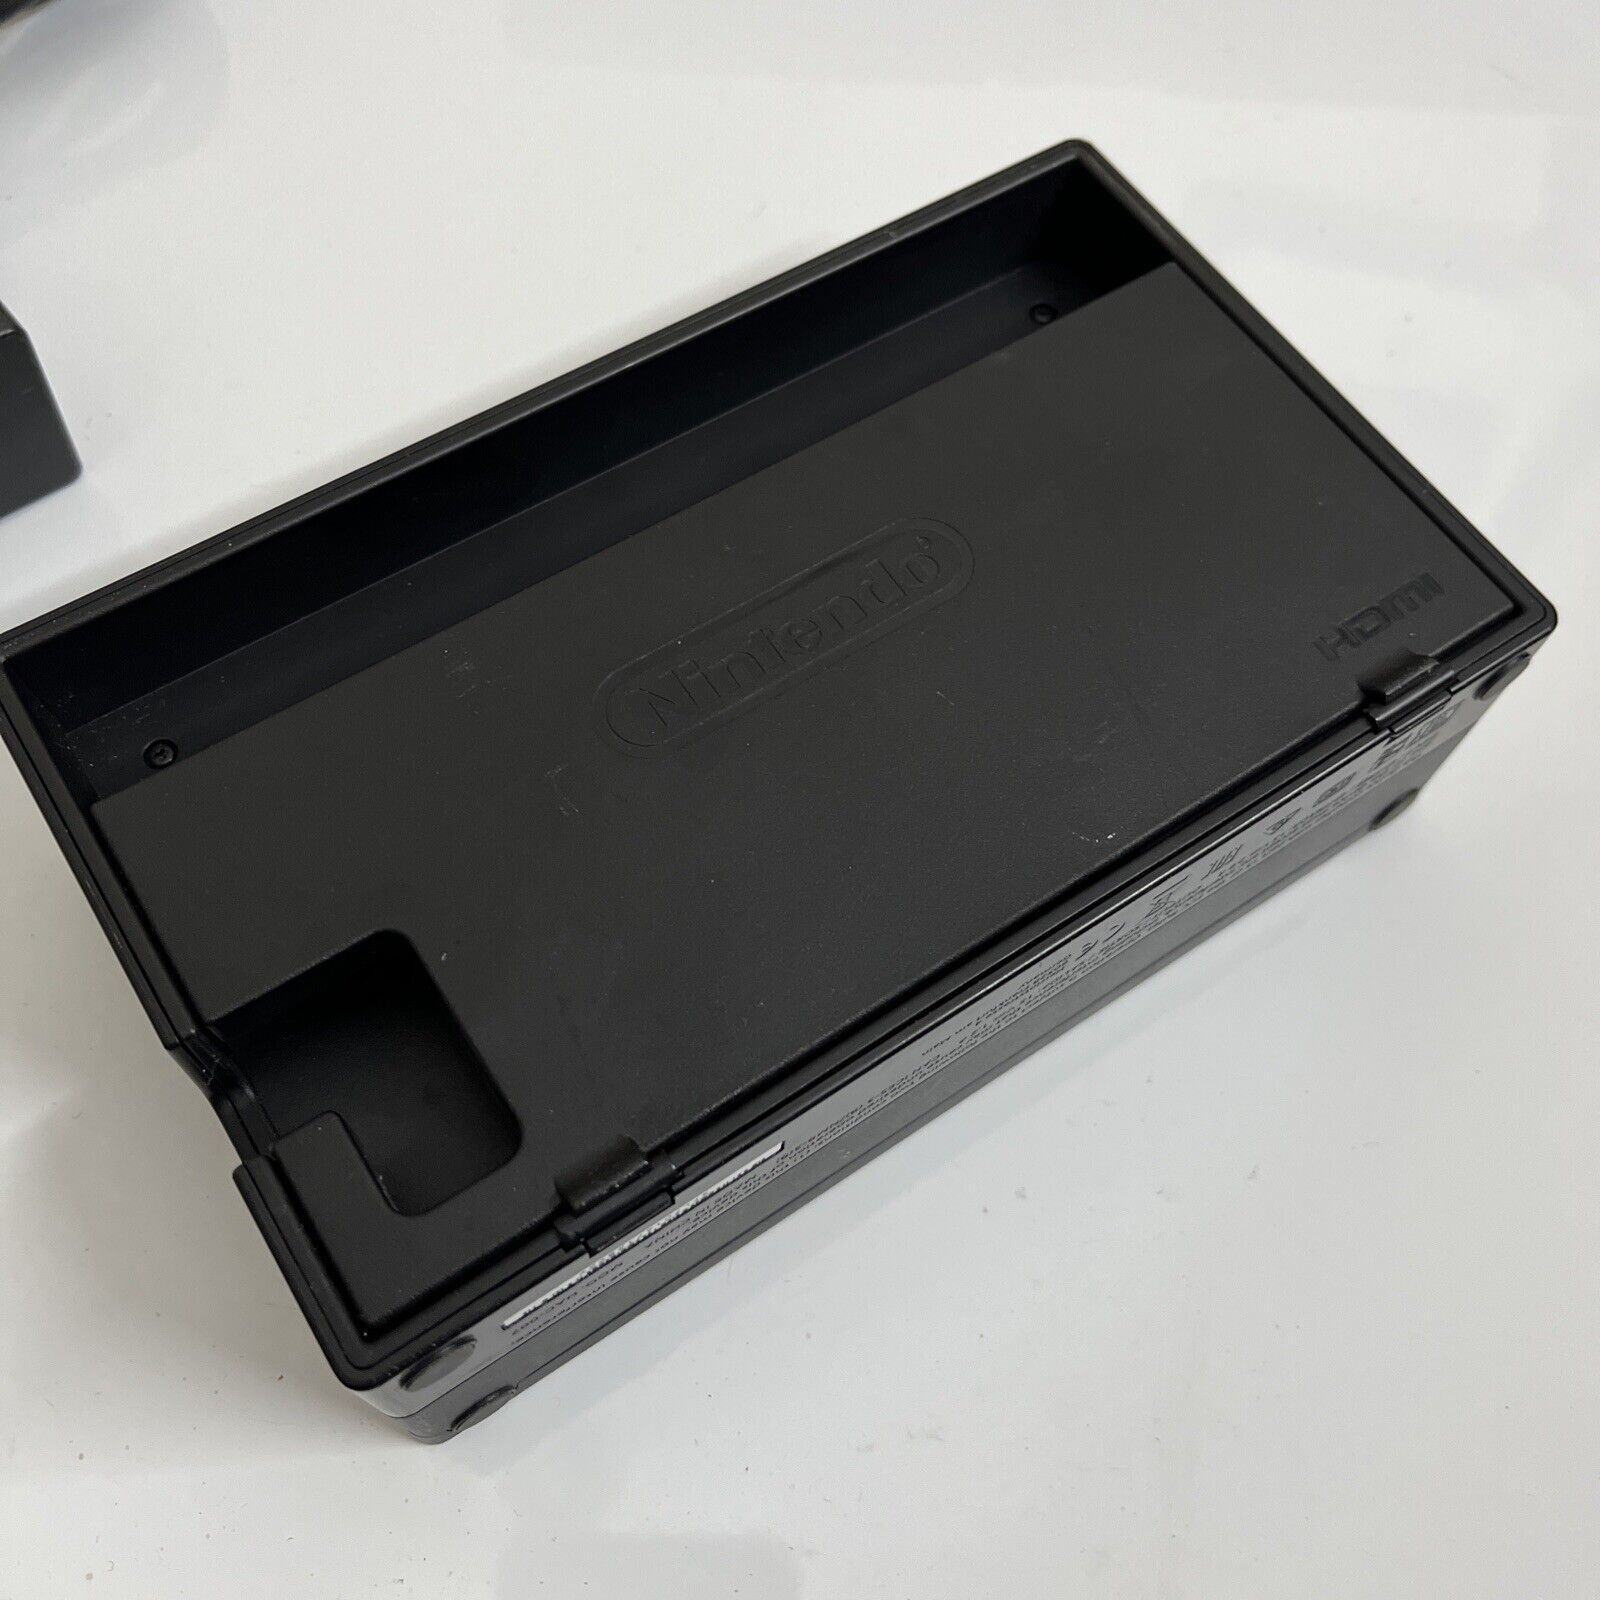 Nintendo HAC-007 Switch Dock Station ONLY for Nintendo Switch